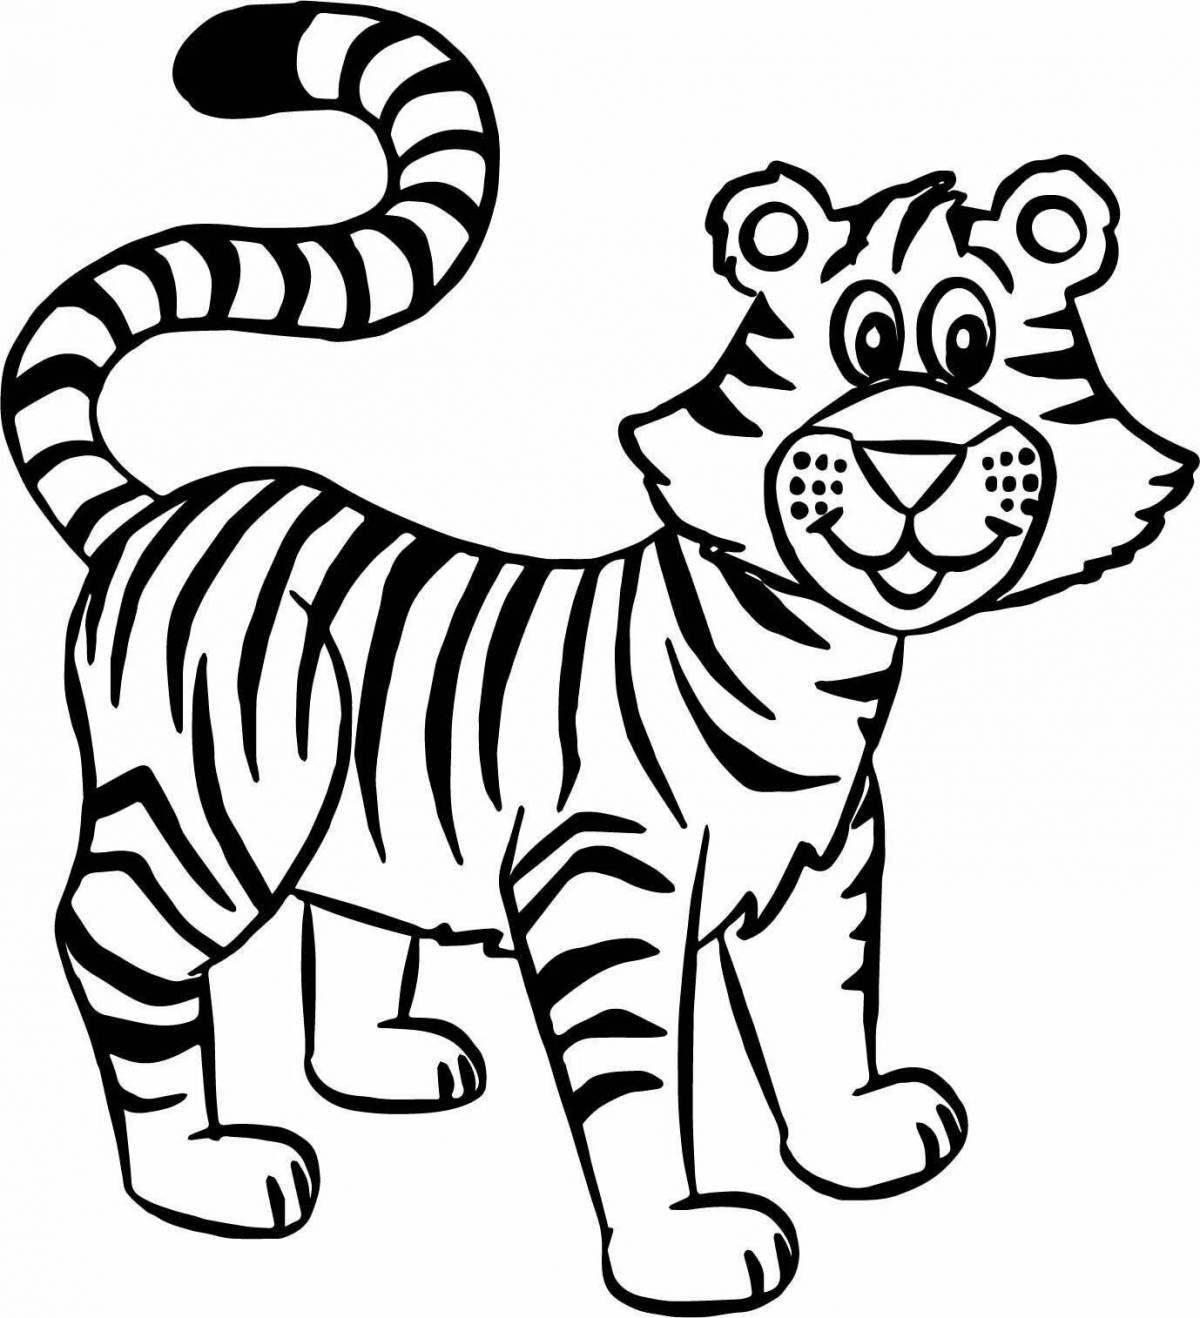 Great tiger drawing for kids